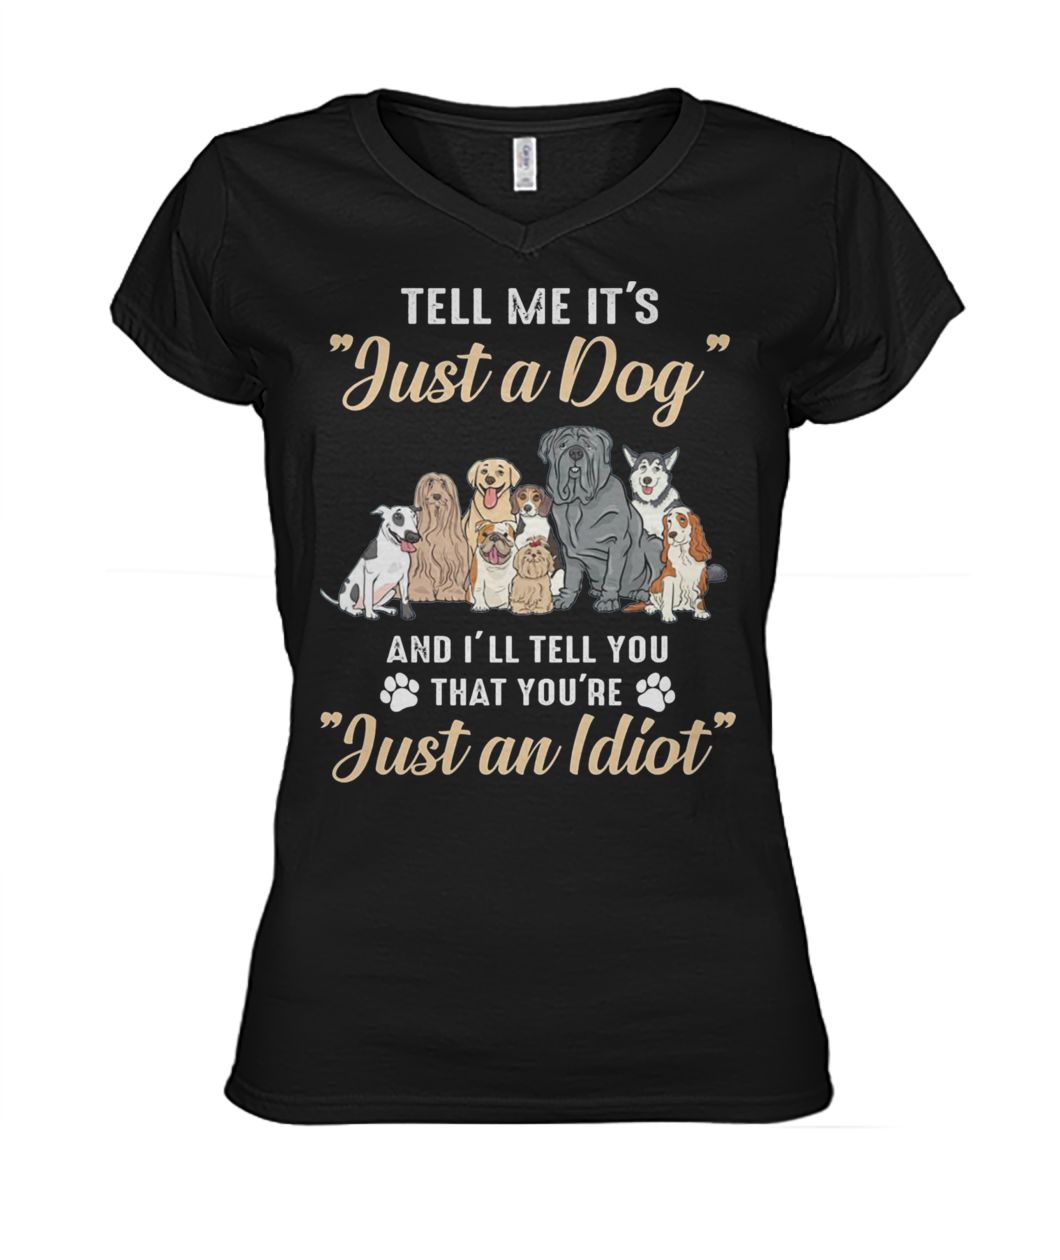 Tell me it's just a dog and I'll tell you that you're just an idiot women's v-neck